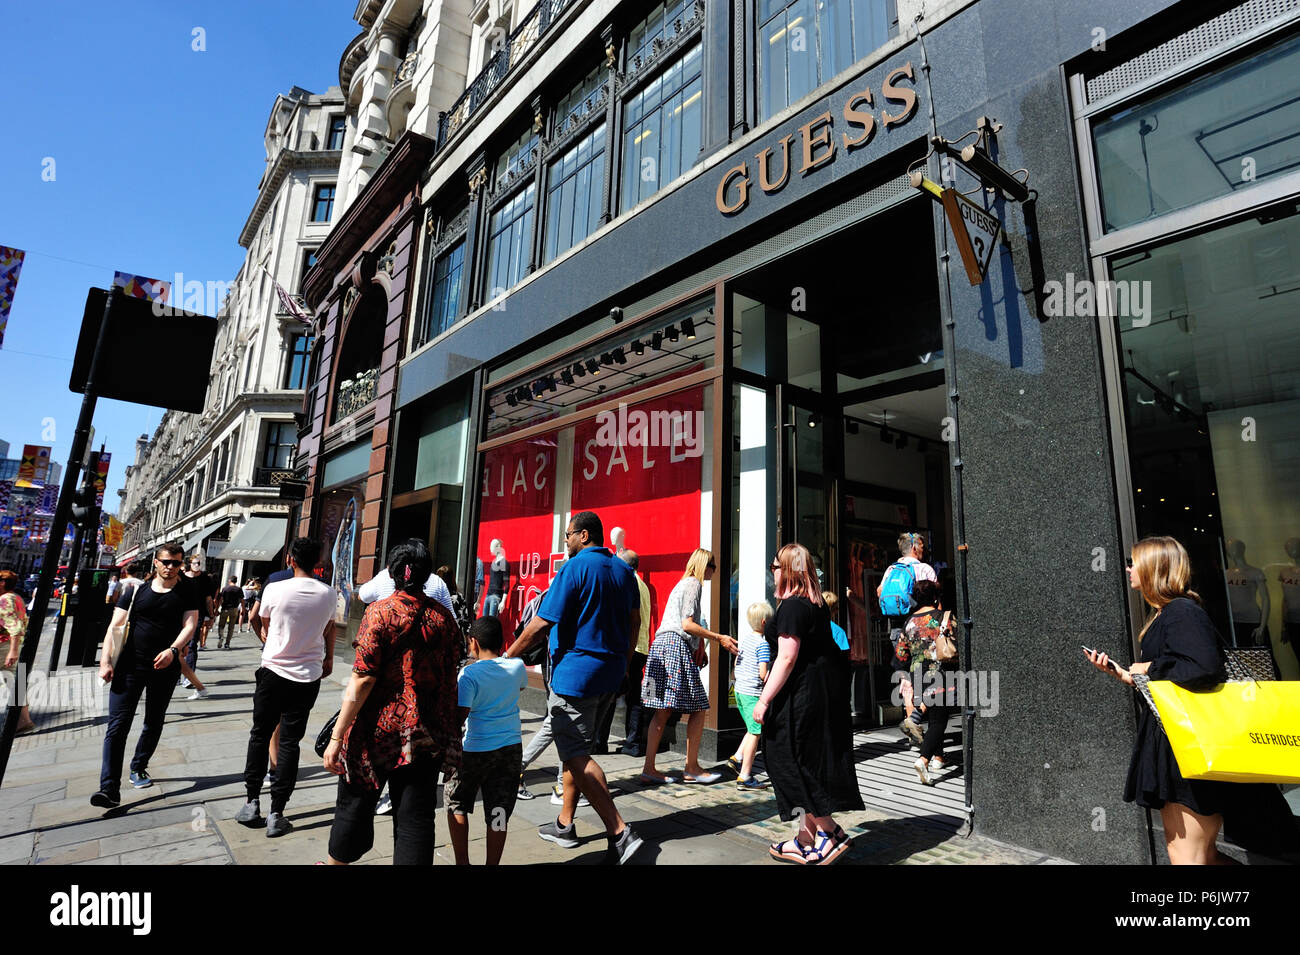 heks Accepteret Poleret Guess Stores High Resolution Stock Photography and Images - Alamy